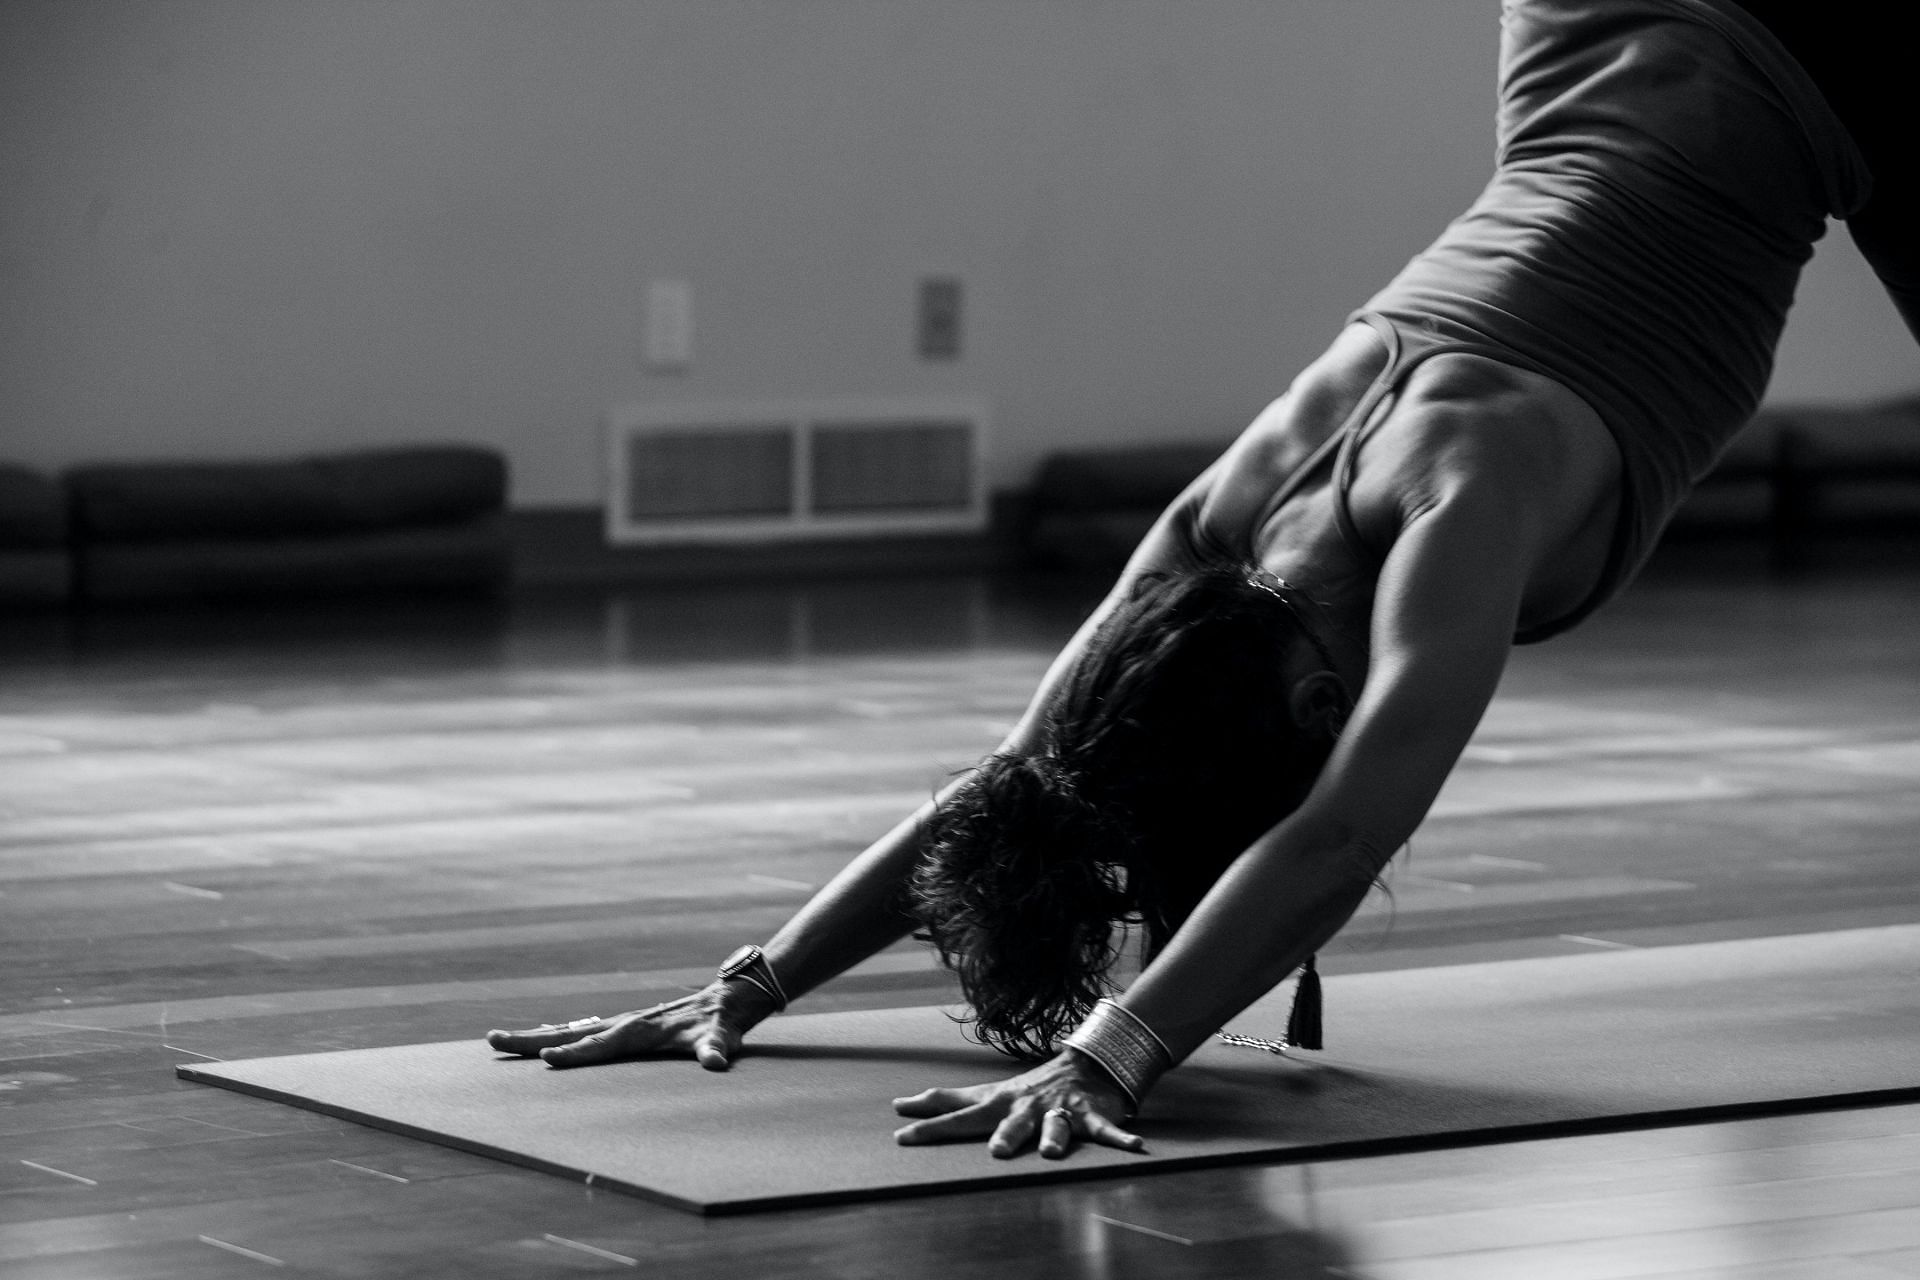 A black and white image of a woman performing a downward dog pose on a yoga mat.